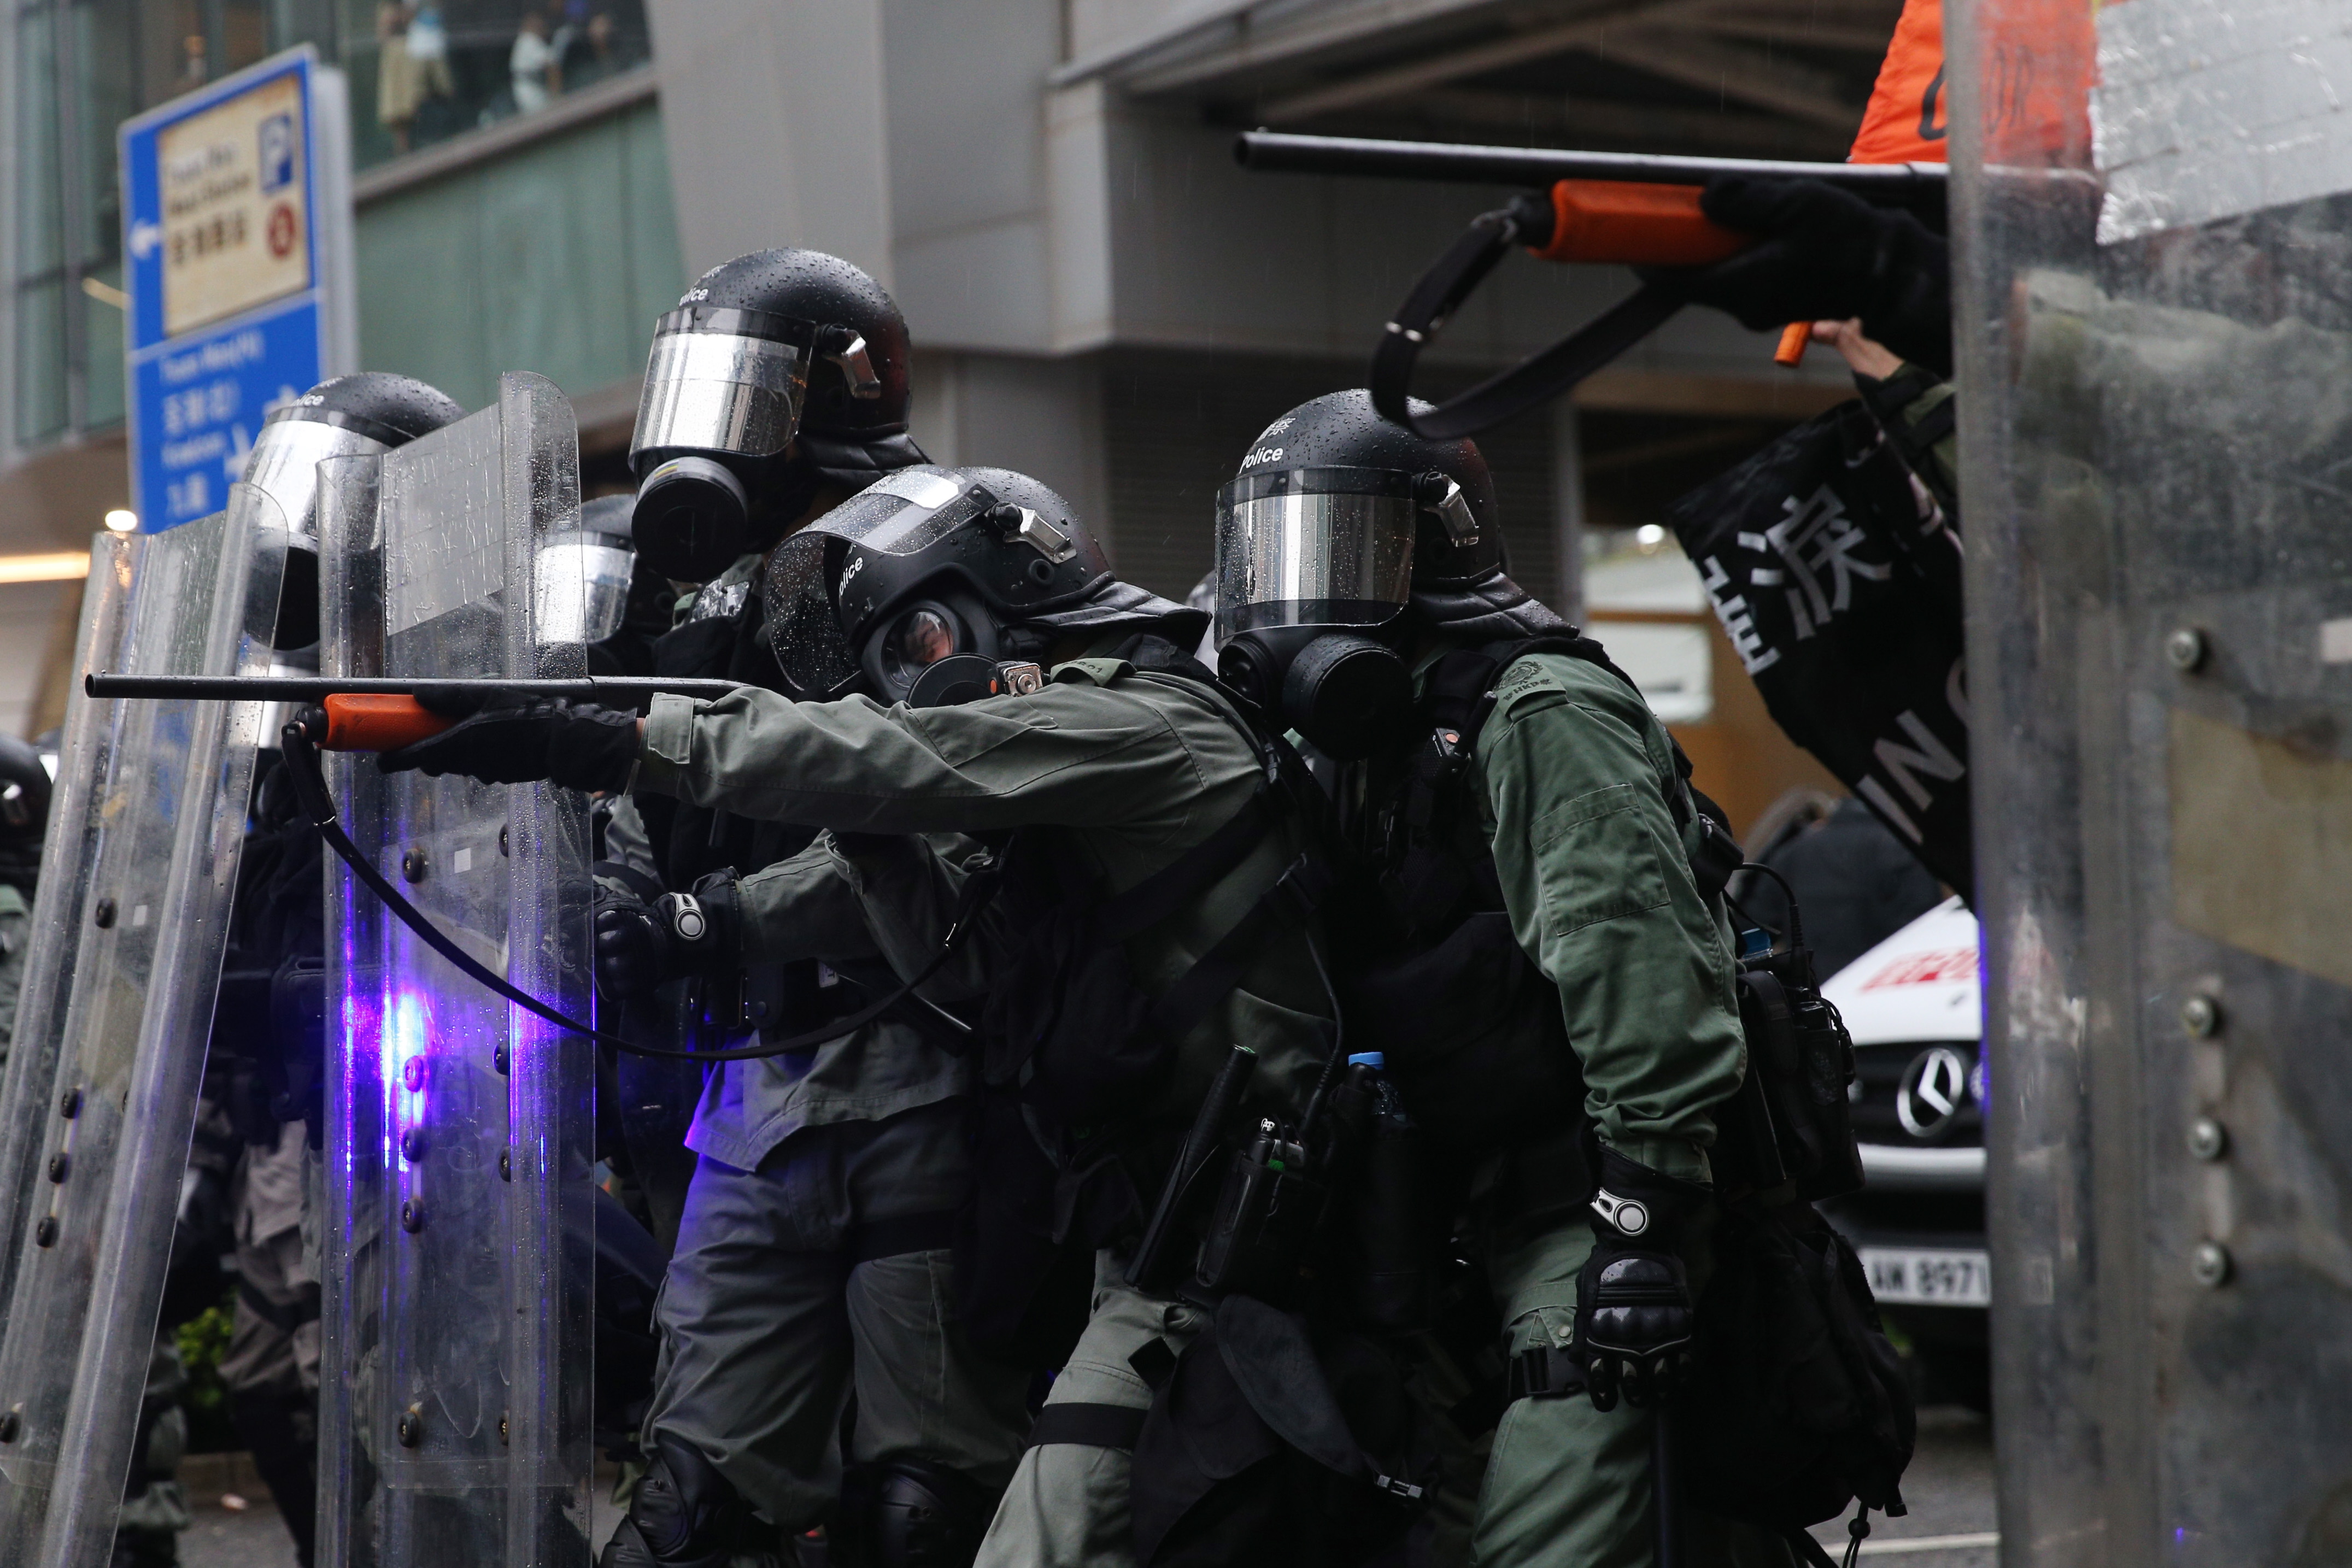 epa07792157 Riot police aim their guns as protesters take part in an anti-government rally in Kwai Fung and Tsuen Wan, Hong Kong, China, 25 August 2019. The protests were triggered last June by an extradition bill to China, now suspended, and evolved into a wider anti-government movement with no end in sight.  EPA/JEROME FAVRE